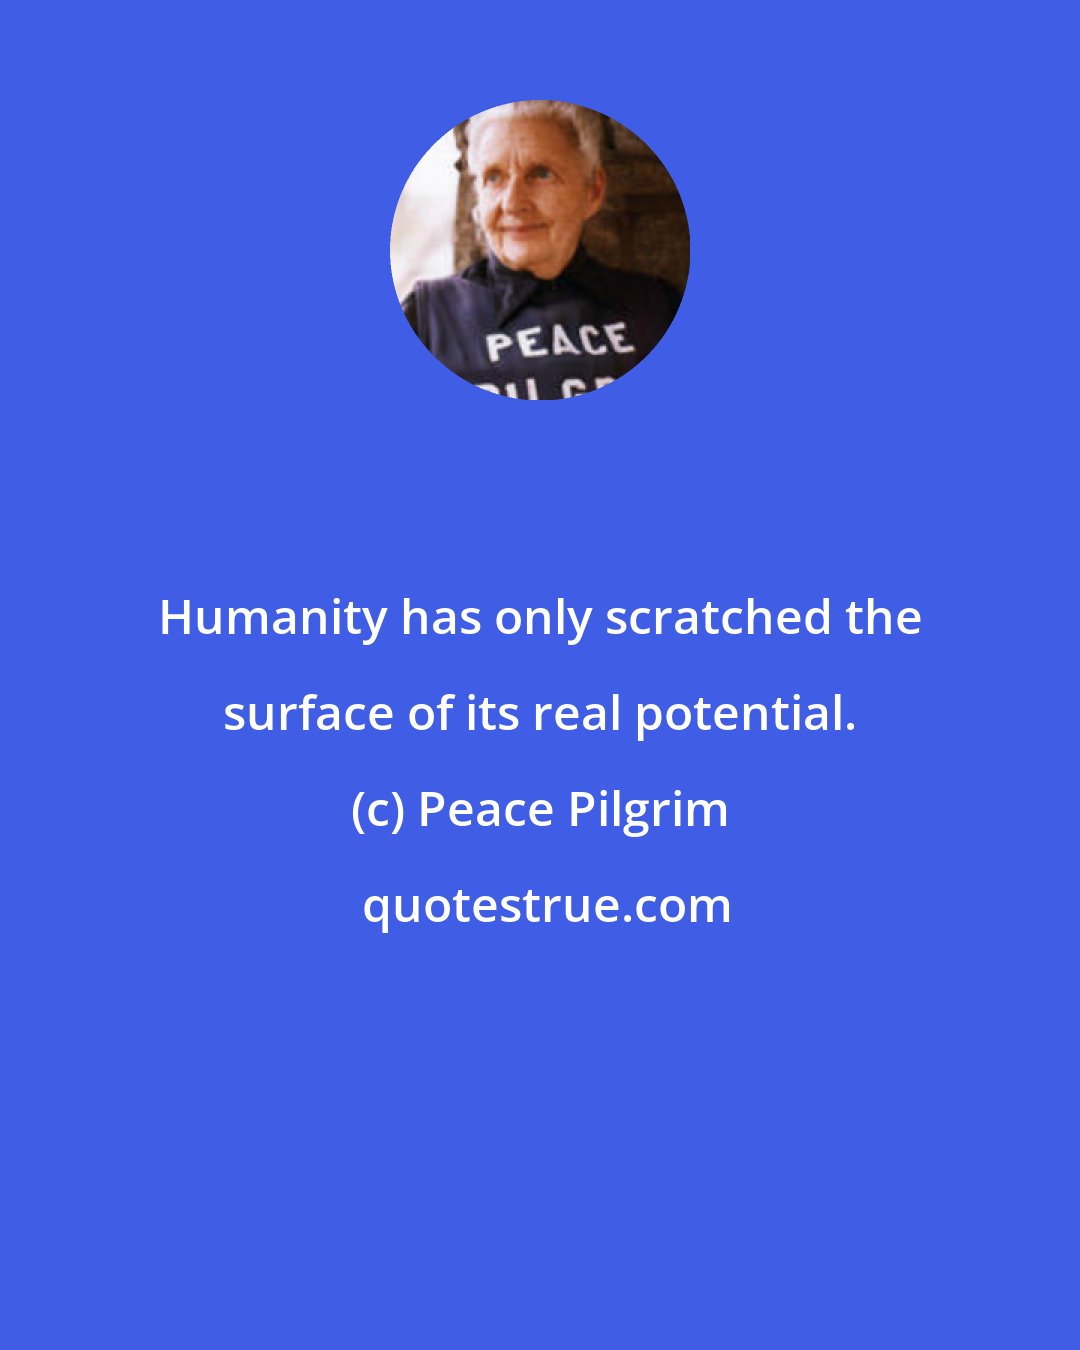 Peace Pilgrim: Humanity has only scratched the surface of its real potential.